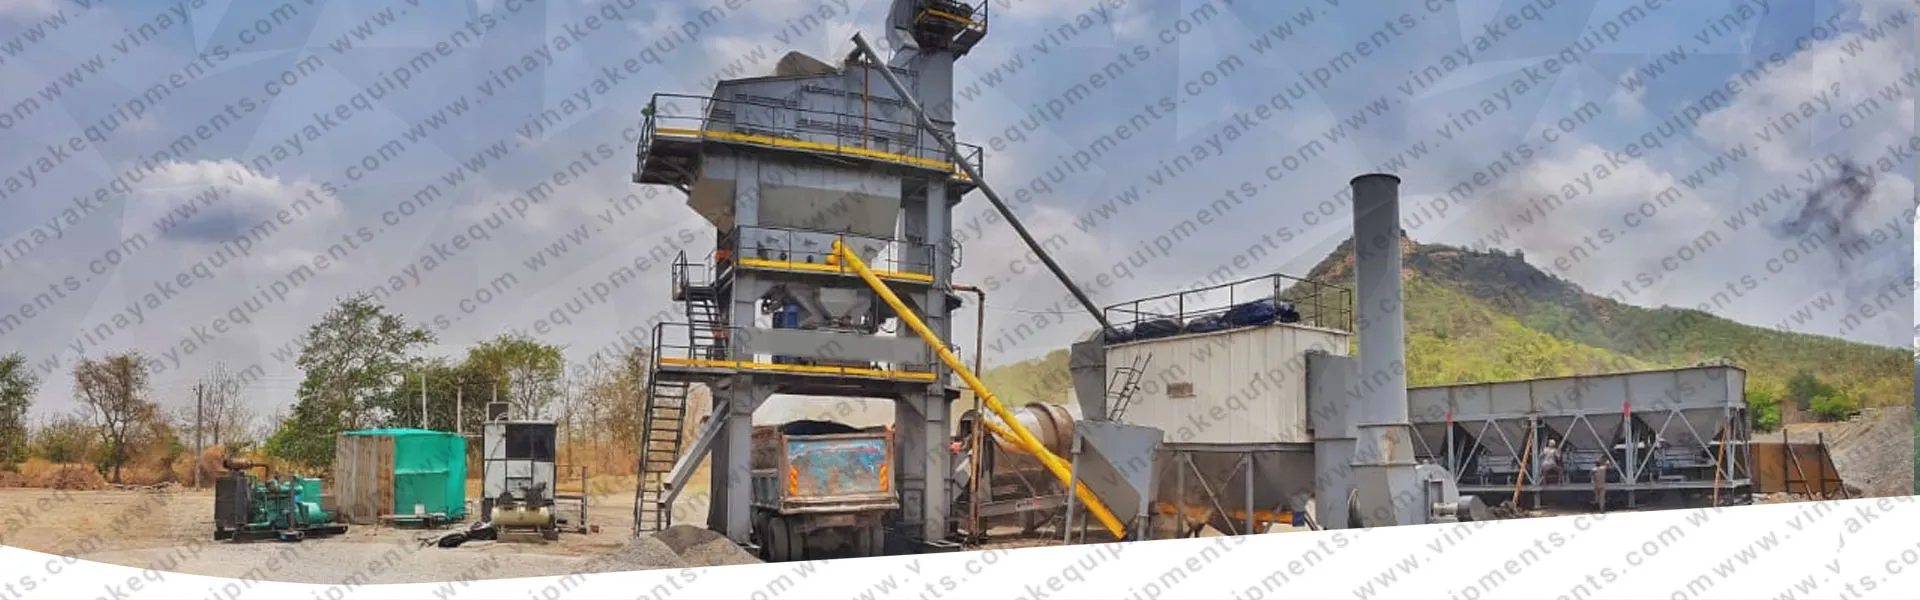 Mobile concrete batching plant, south africa, australia, china, india